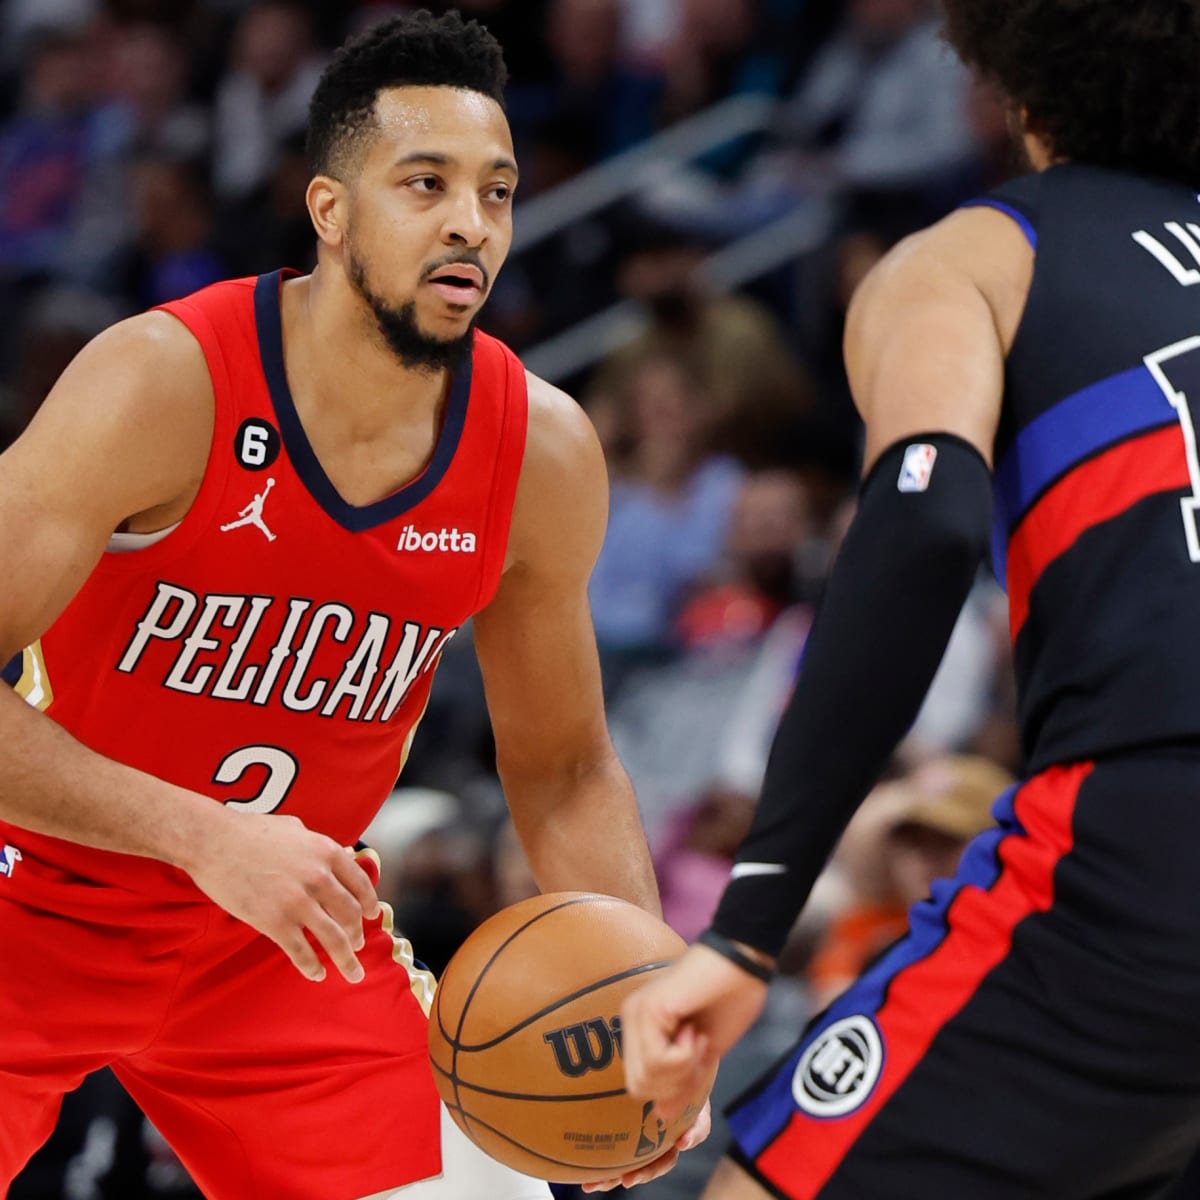 CJ McCollum leads Pelicans past Spurs in play-in game